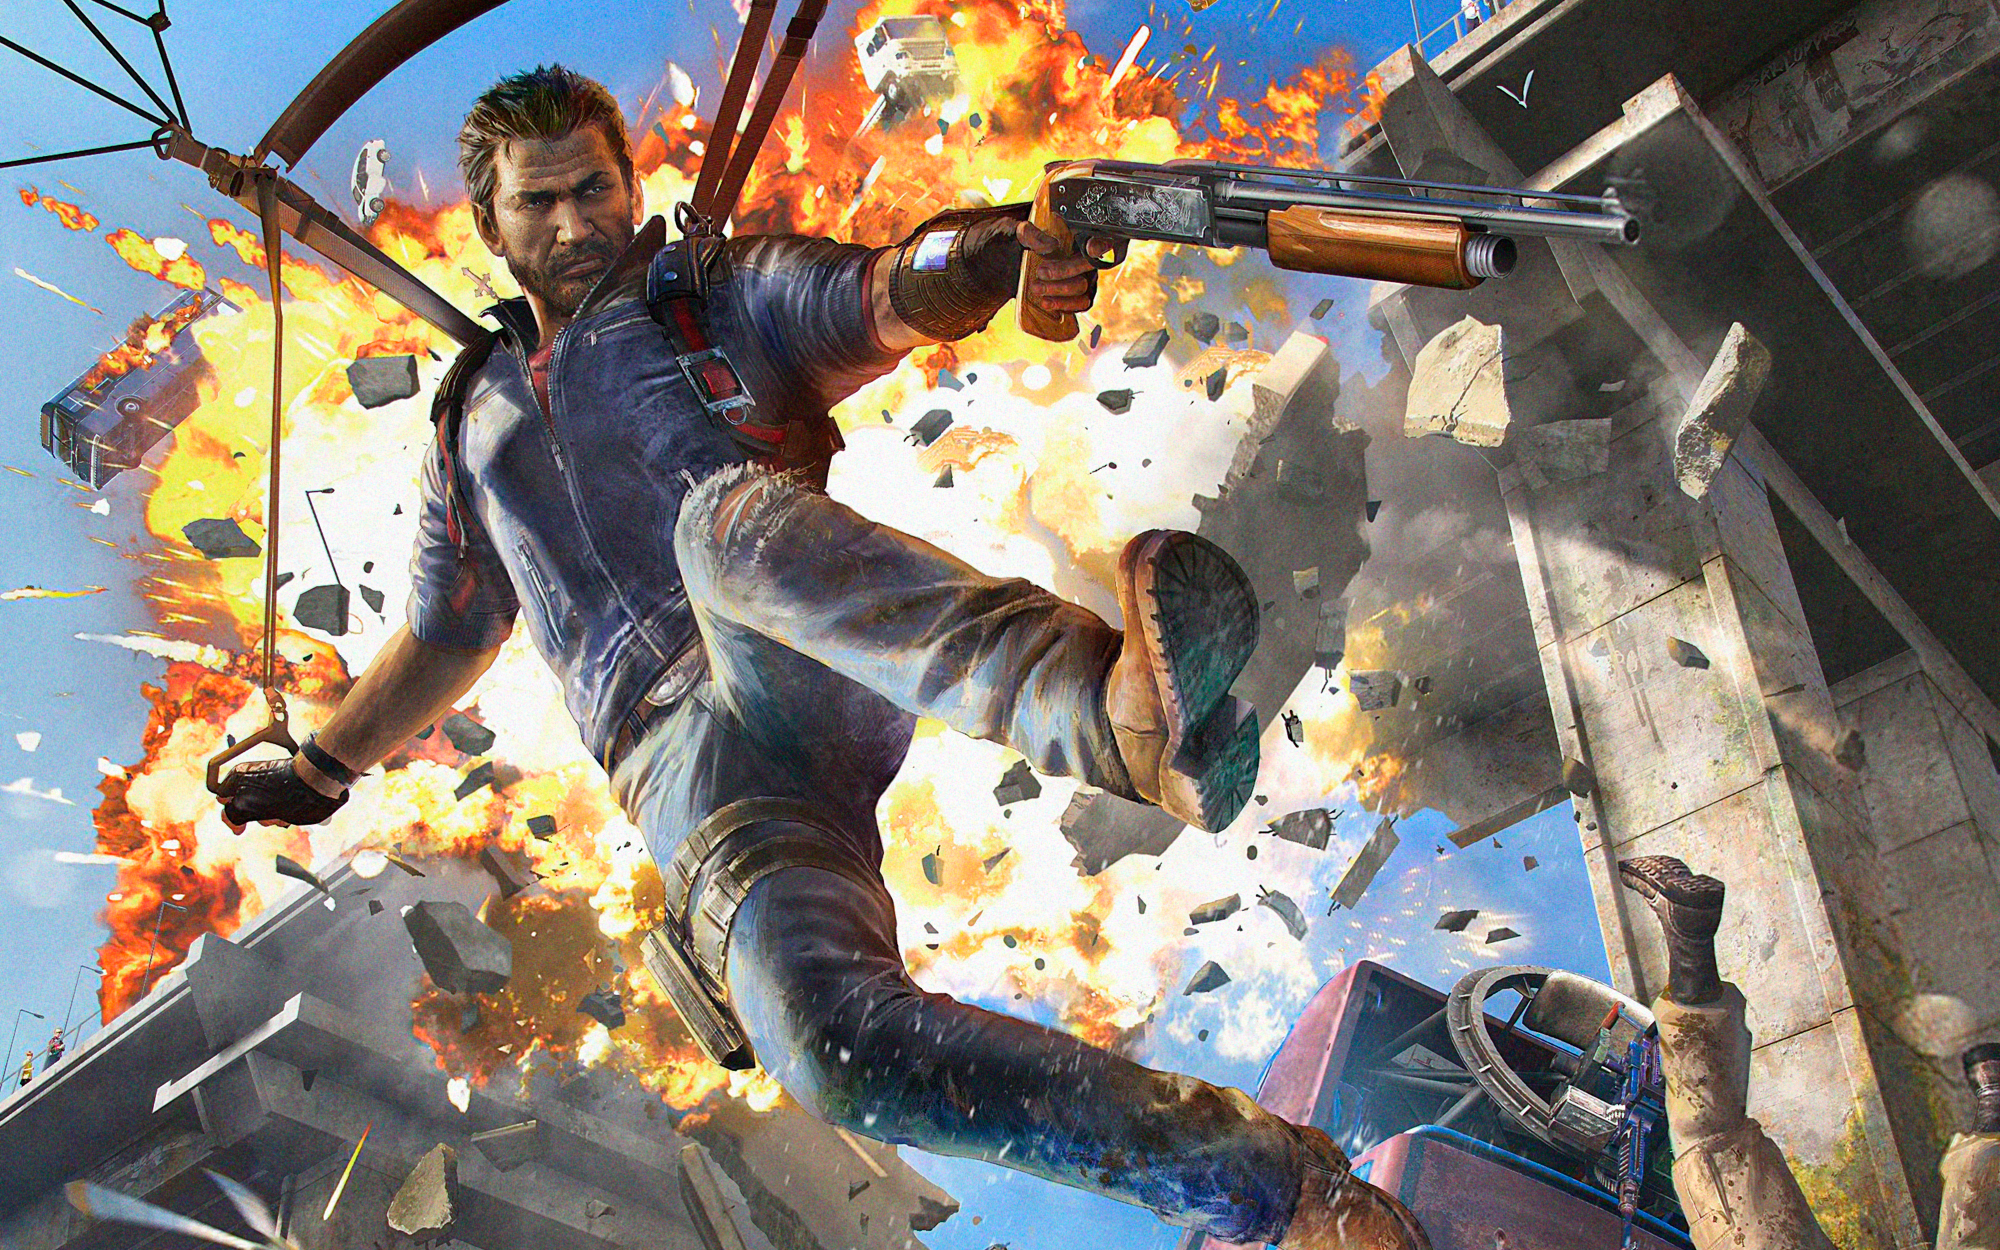 16 action. Рико Родригес just cause 3. Рико Родригес just cause 1. Рико Родригес just cause 2. Рико Родригес just cause 4.